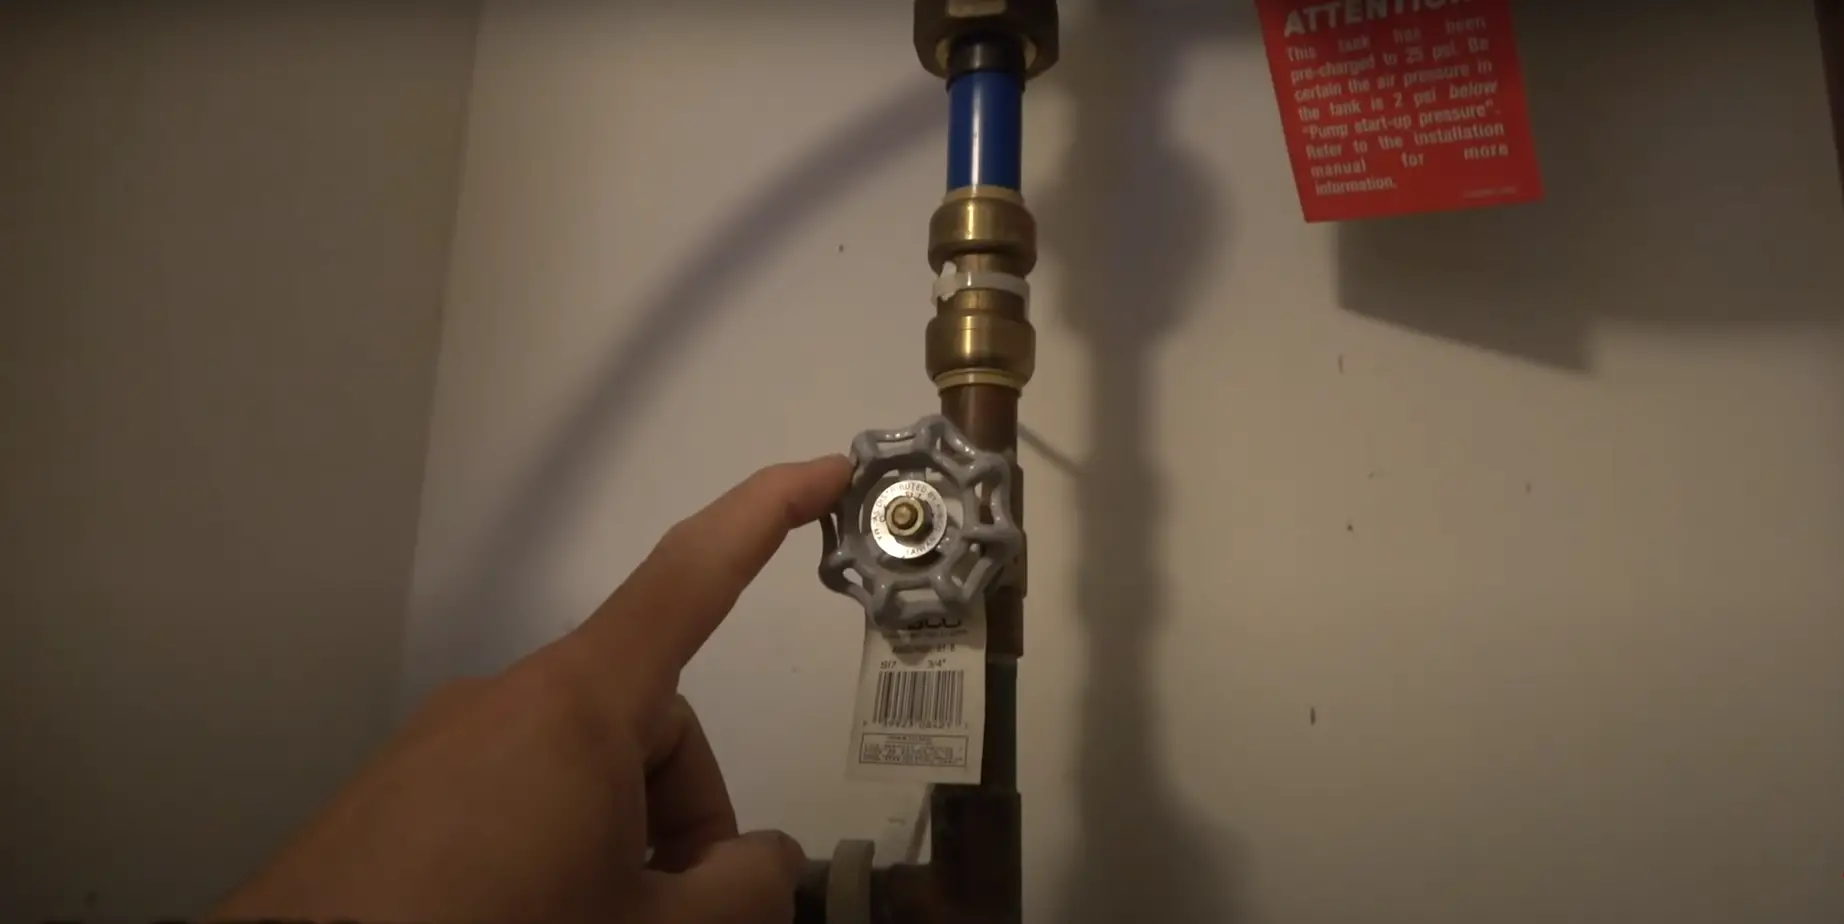 8. Connect A Garden Hose To A Water Pressure Pump